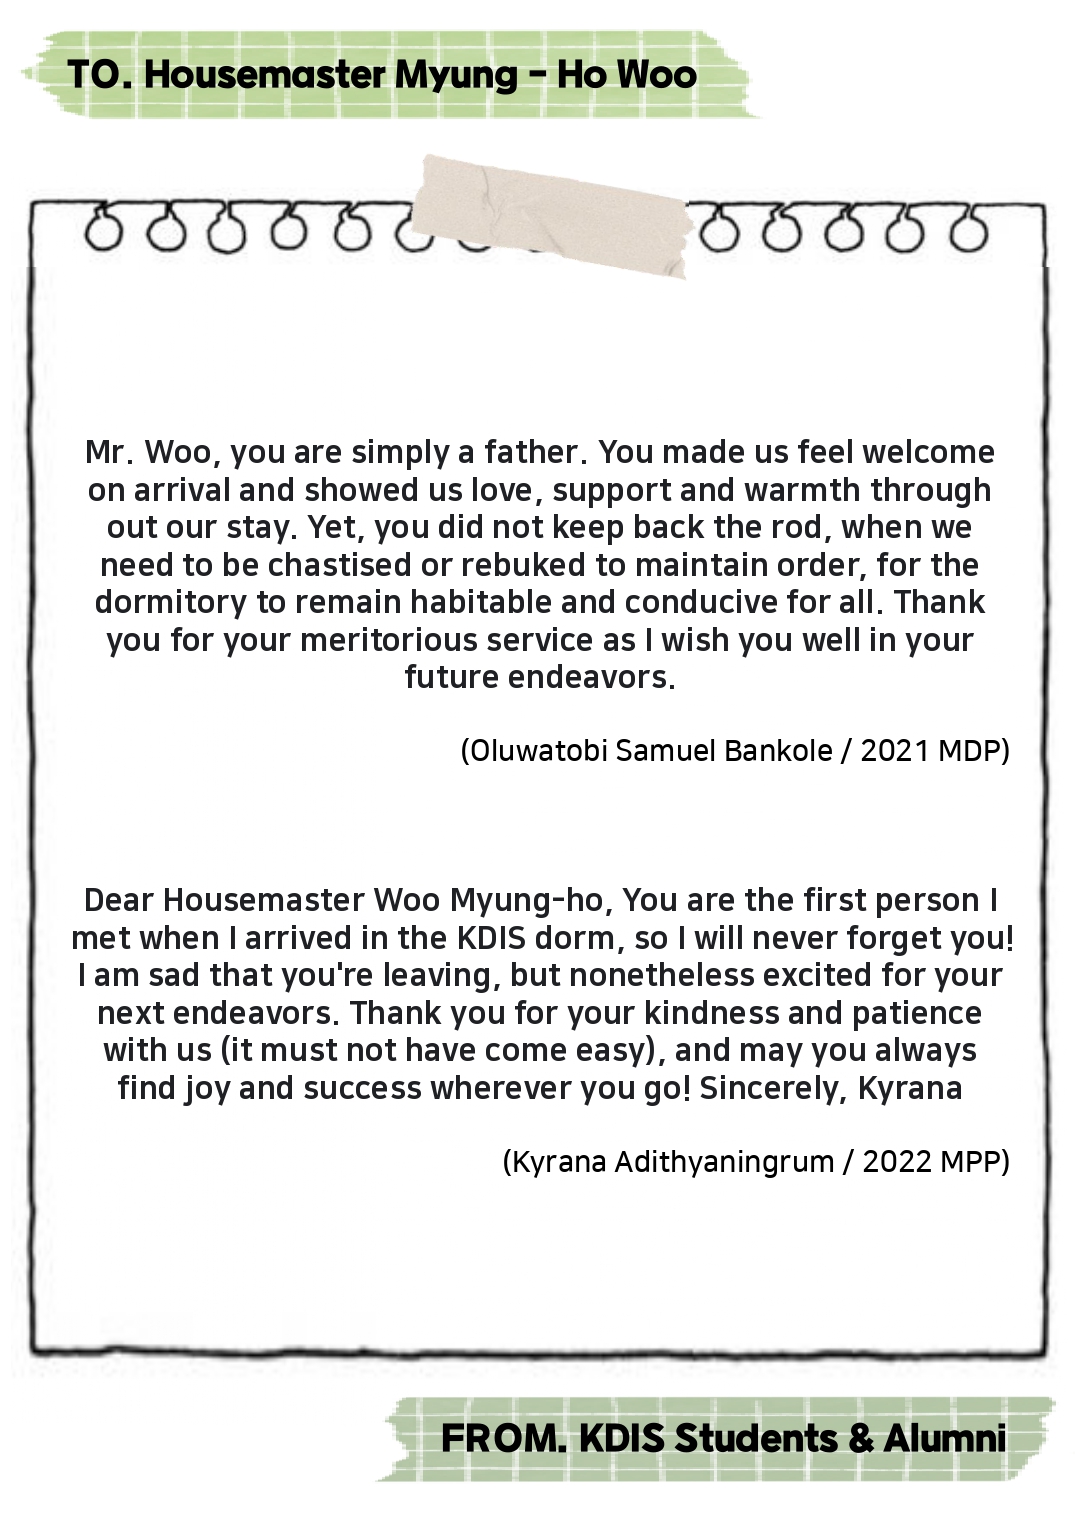 Thank you Housemaster Myung-ho Woo -Messages from KDIS Students and Alumni 사진19